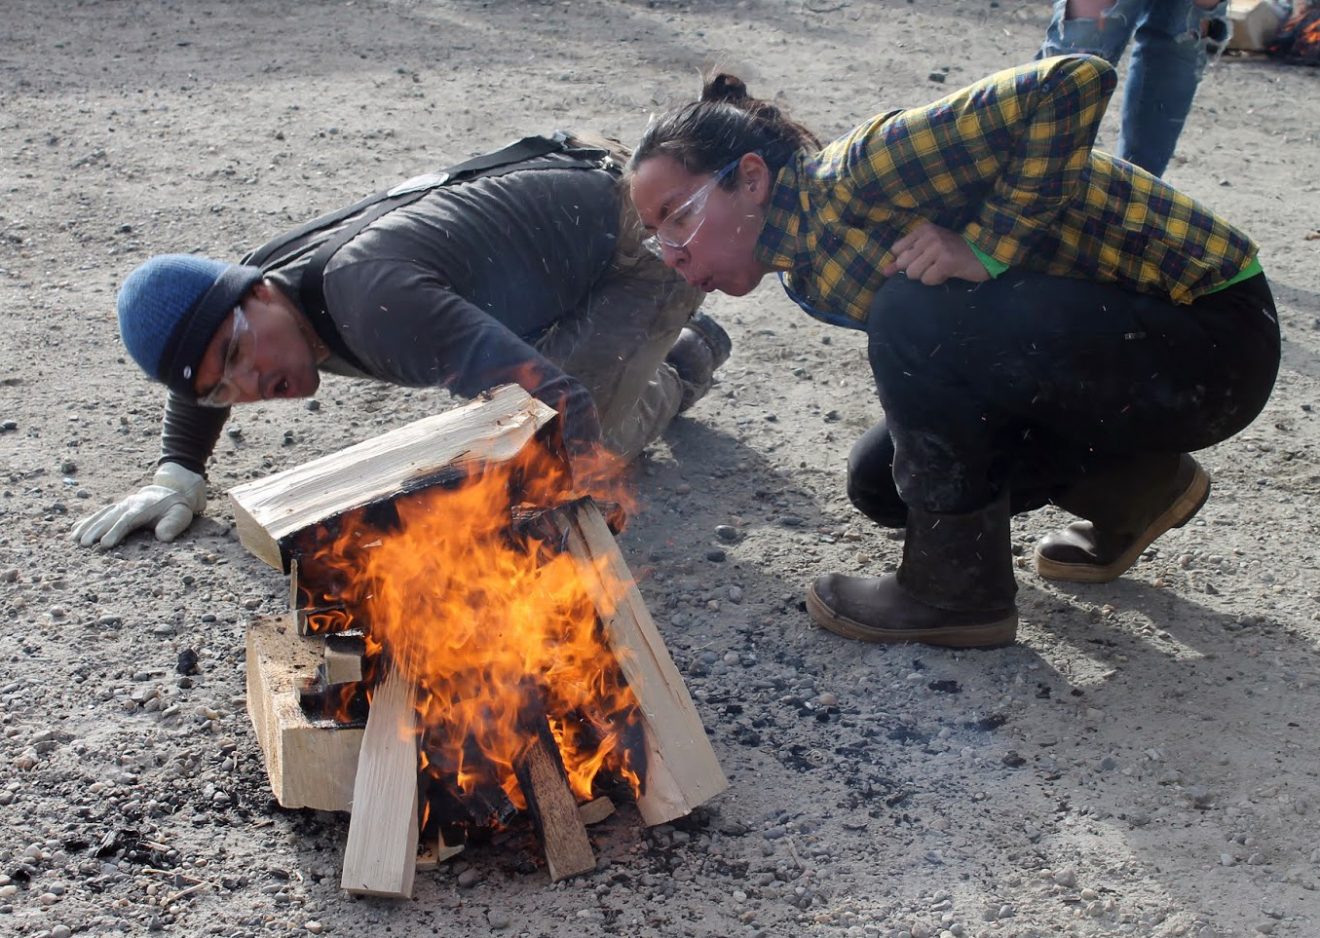 Jon Hutchinson and Ida Petersen work to start a campfire during the 2018 Forest Sports Festival at Ballaine Lake. Photo by Debbie Carter